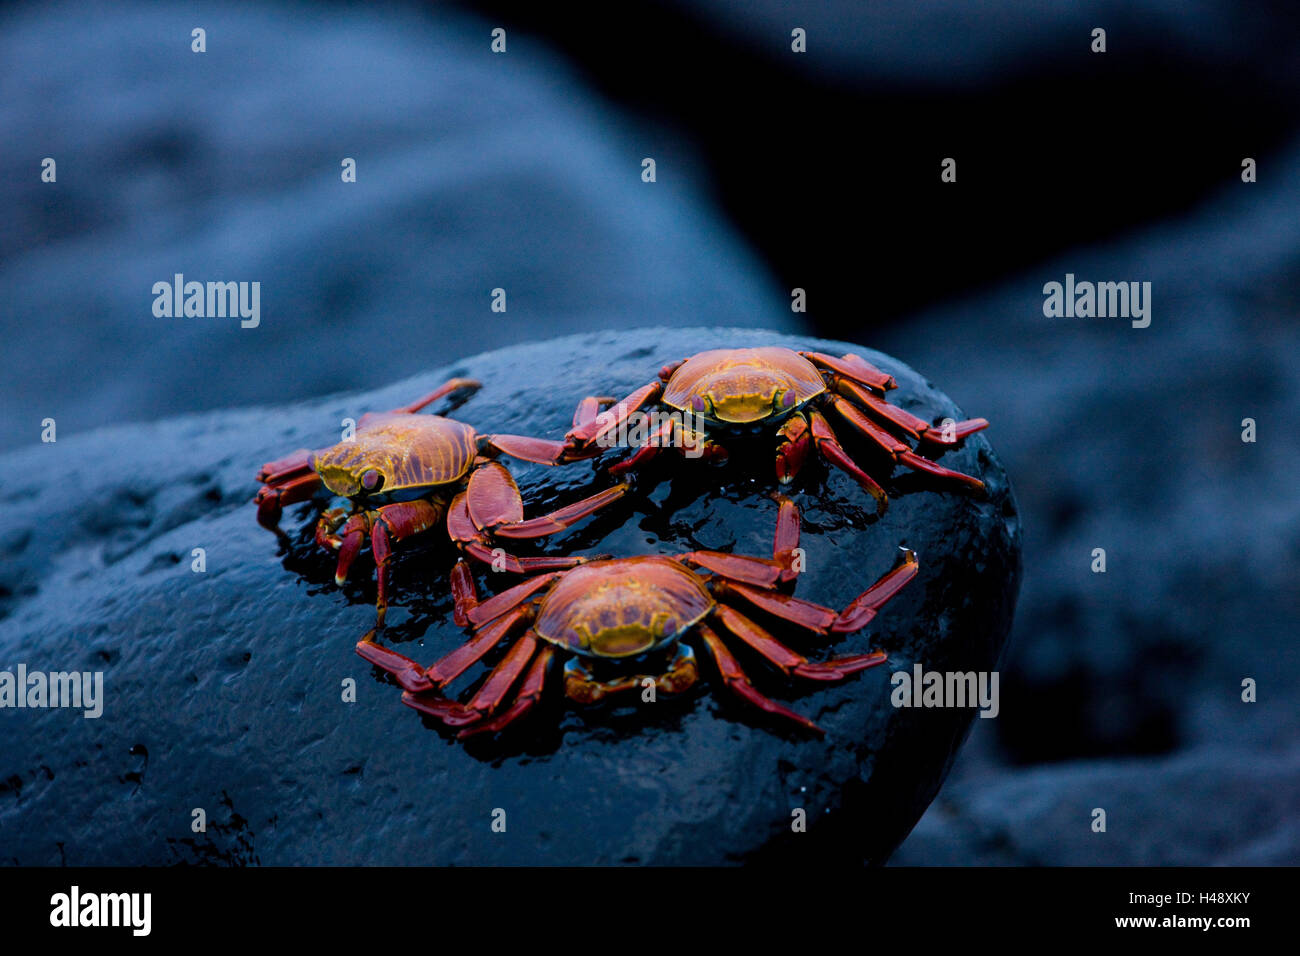 Red cliff crabs, Grapsus grapsus, Ecuador, the Galapagos Islands, South America, Galapagos, island, coast, rock, stone, animal, animals, crabs, three, animal world, cliff crabs, red, radiant, colours, contrast, brightly, Zayapa, arthropod, crustaceans, Crustacea, Stock Photo